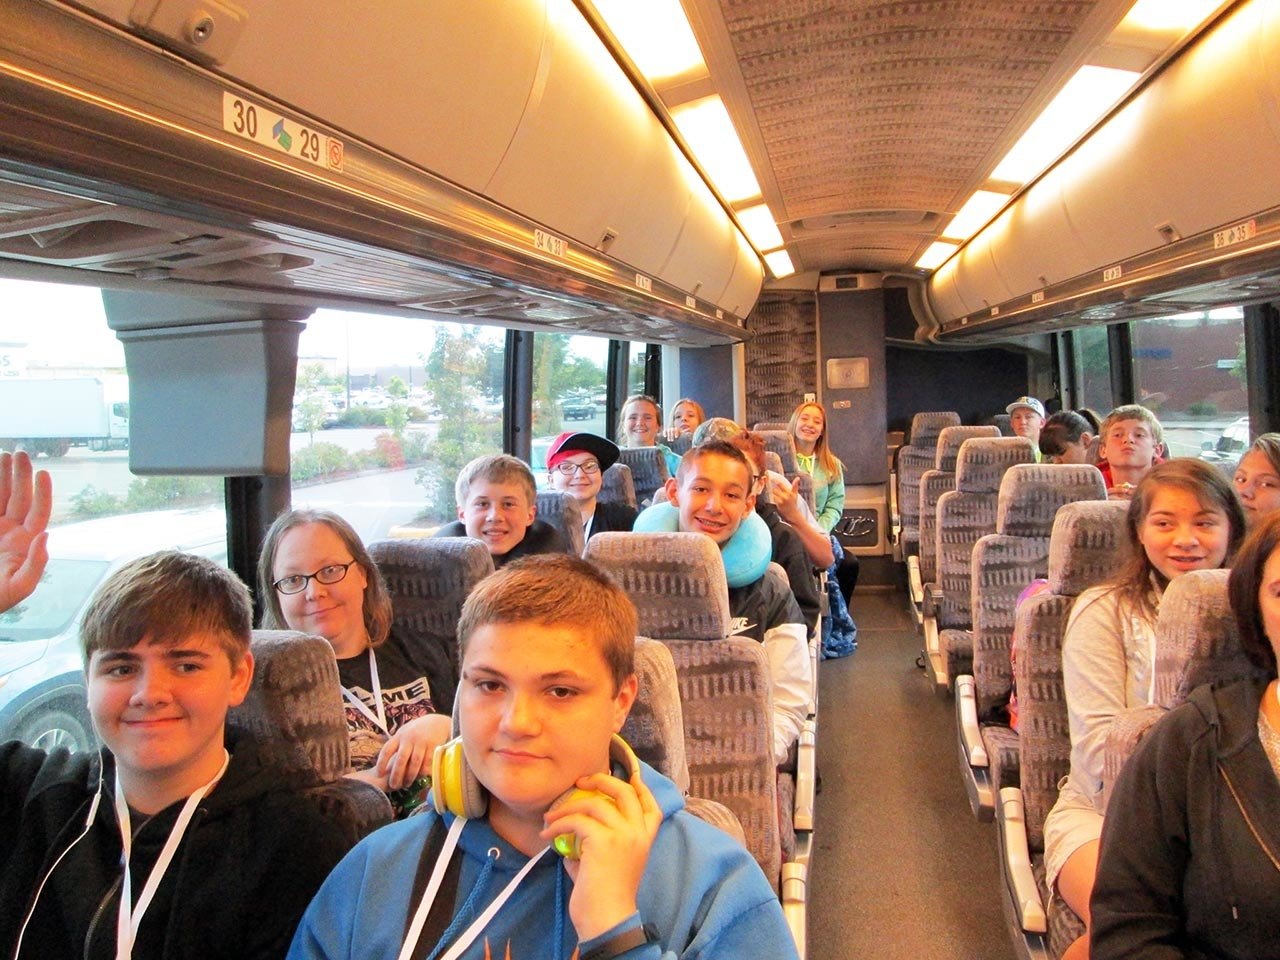 (Laura Carle/Contributed Photo) Miller Junior High School students pose for a photograph on a bus that took them to the airport in June 2016 for a week long trip to Washington D.C. and New York City. Efforts have begun to plan and raise funds for the June 2018 learning adventure.